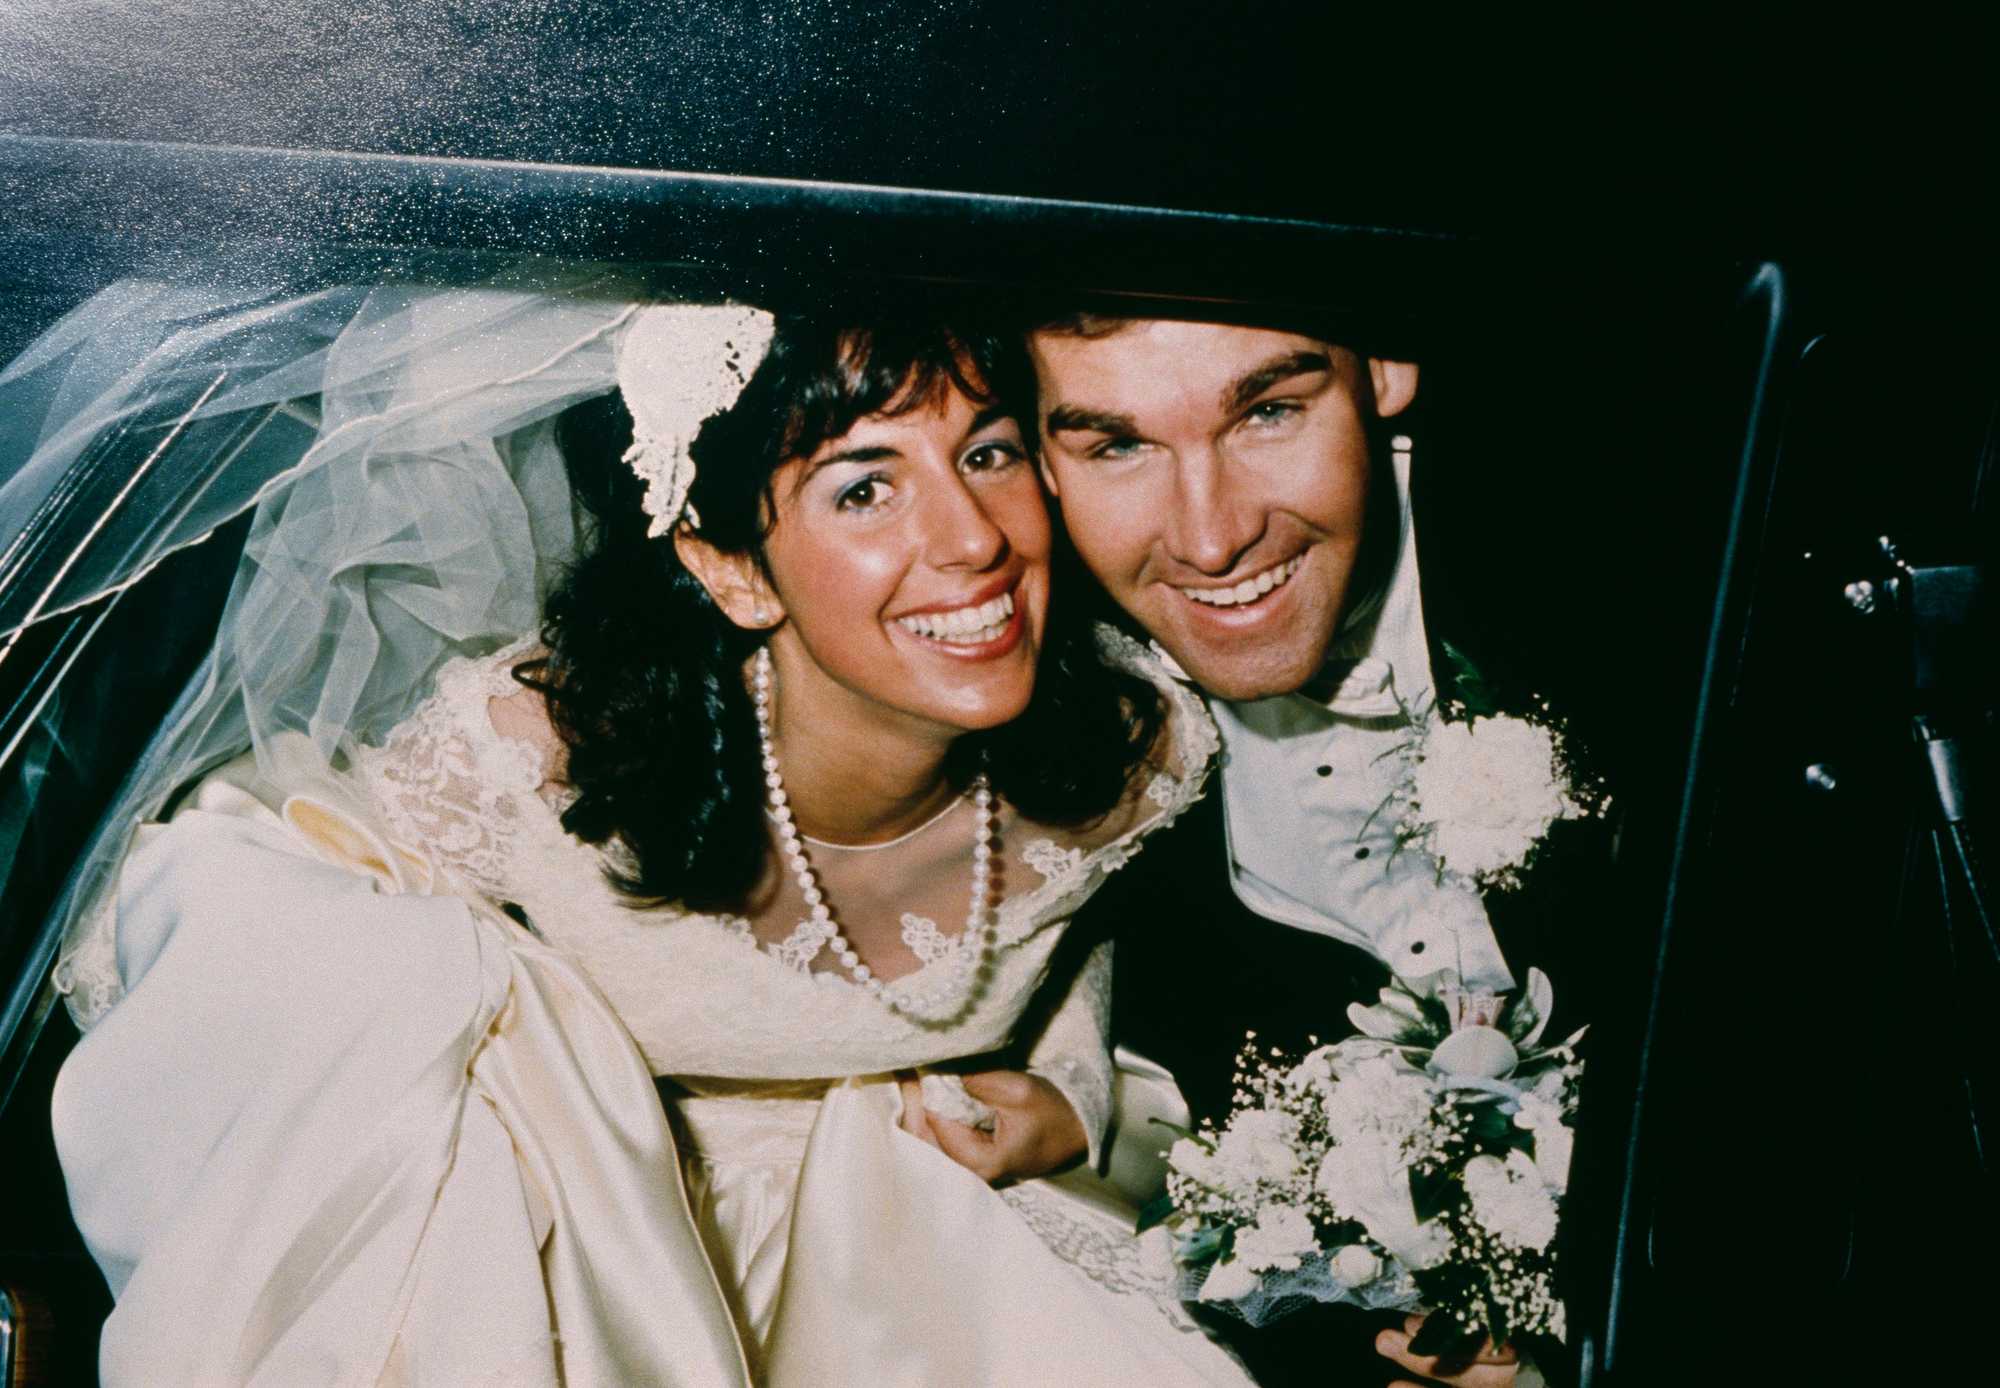 Carol and Charles Stuart on the day of their wedding, October 13, 1985.